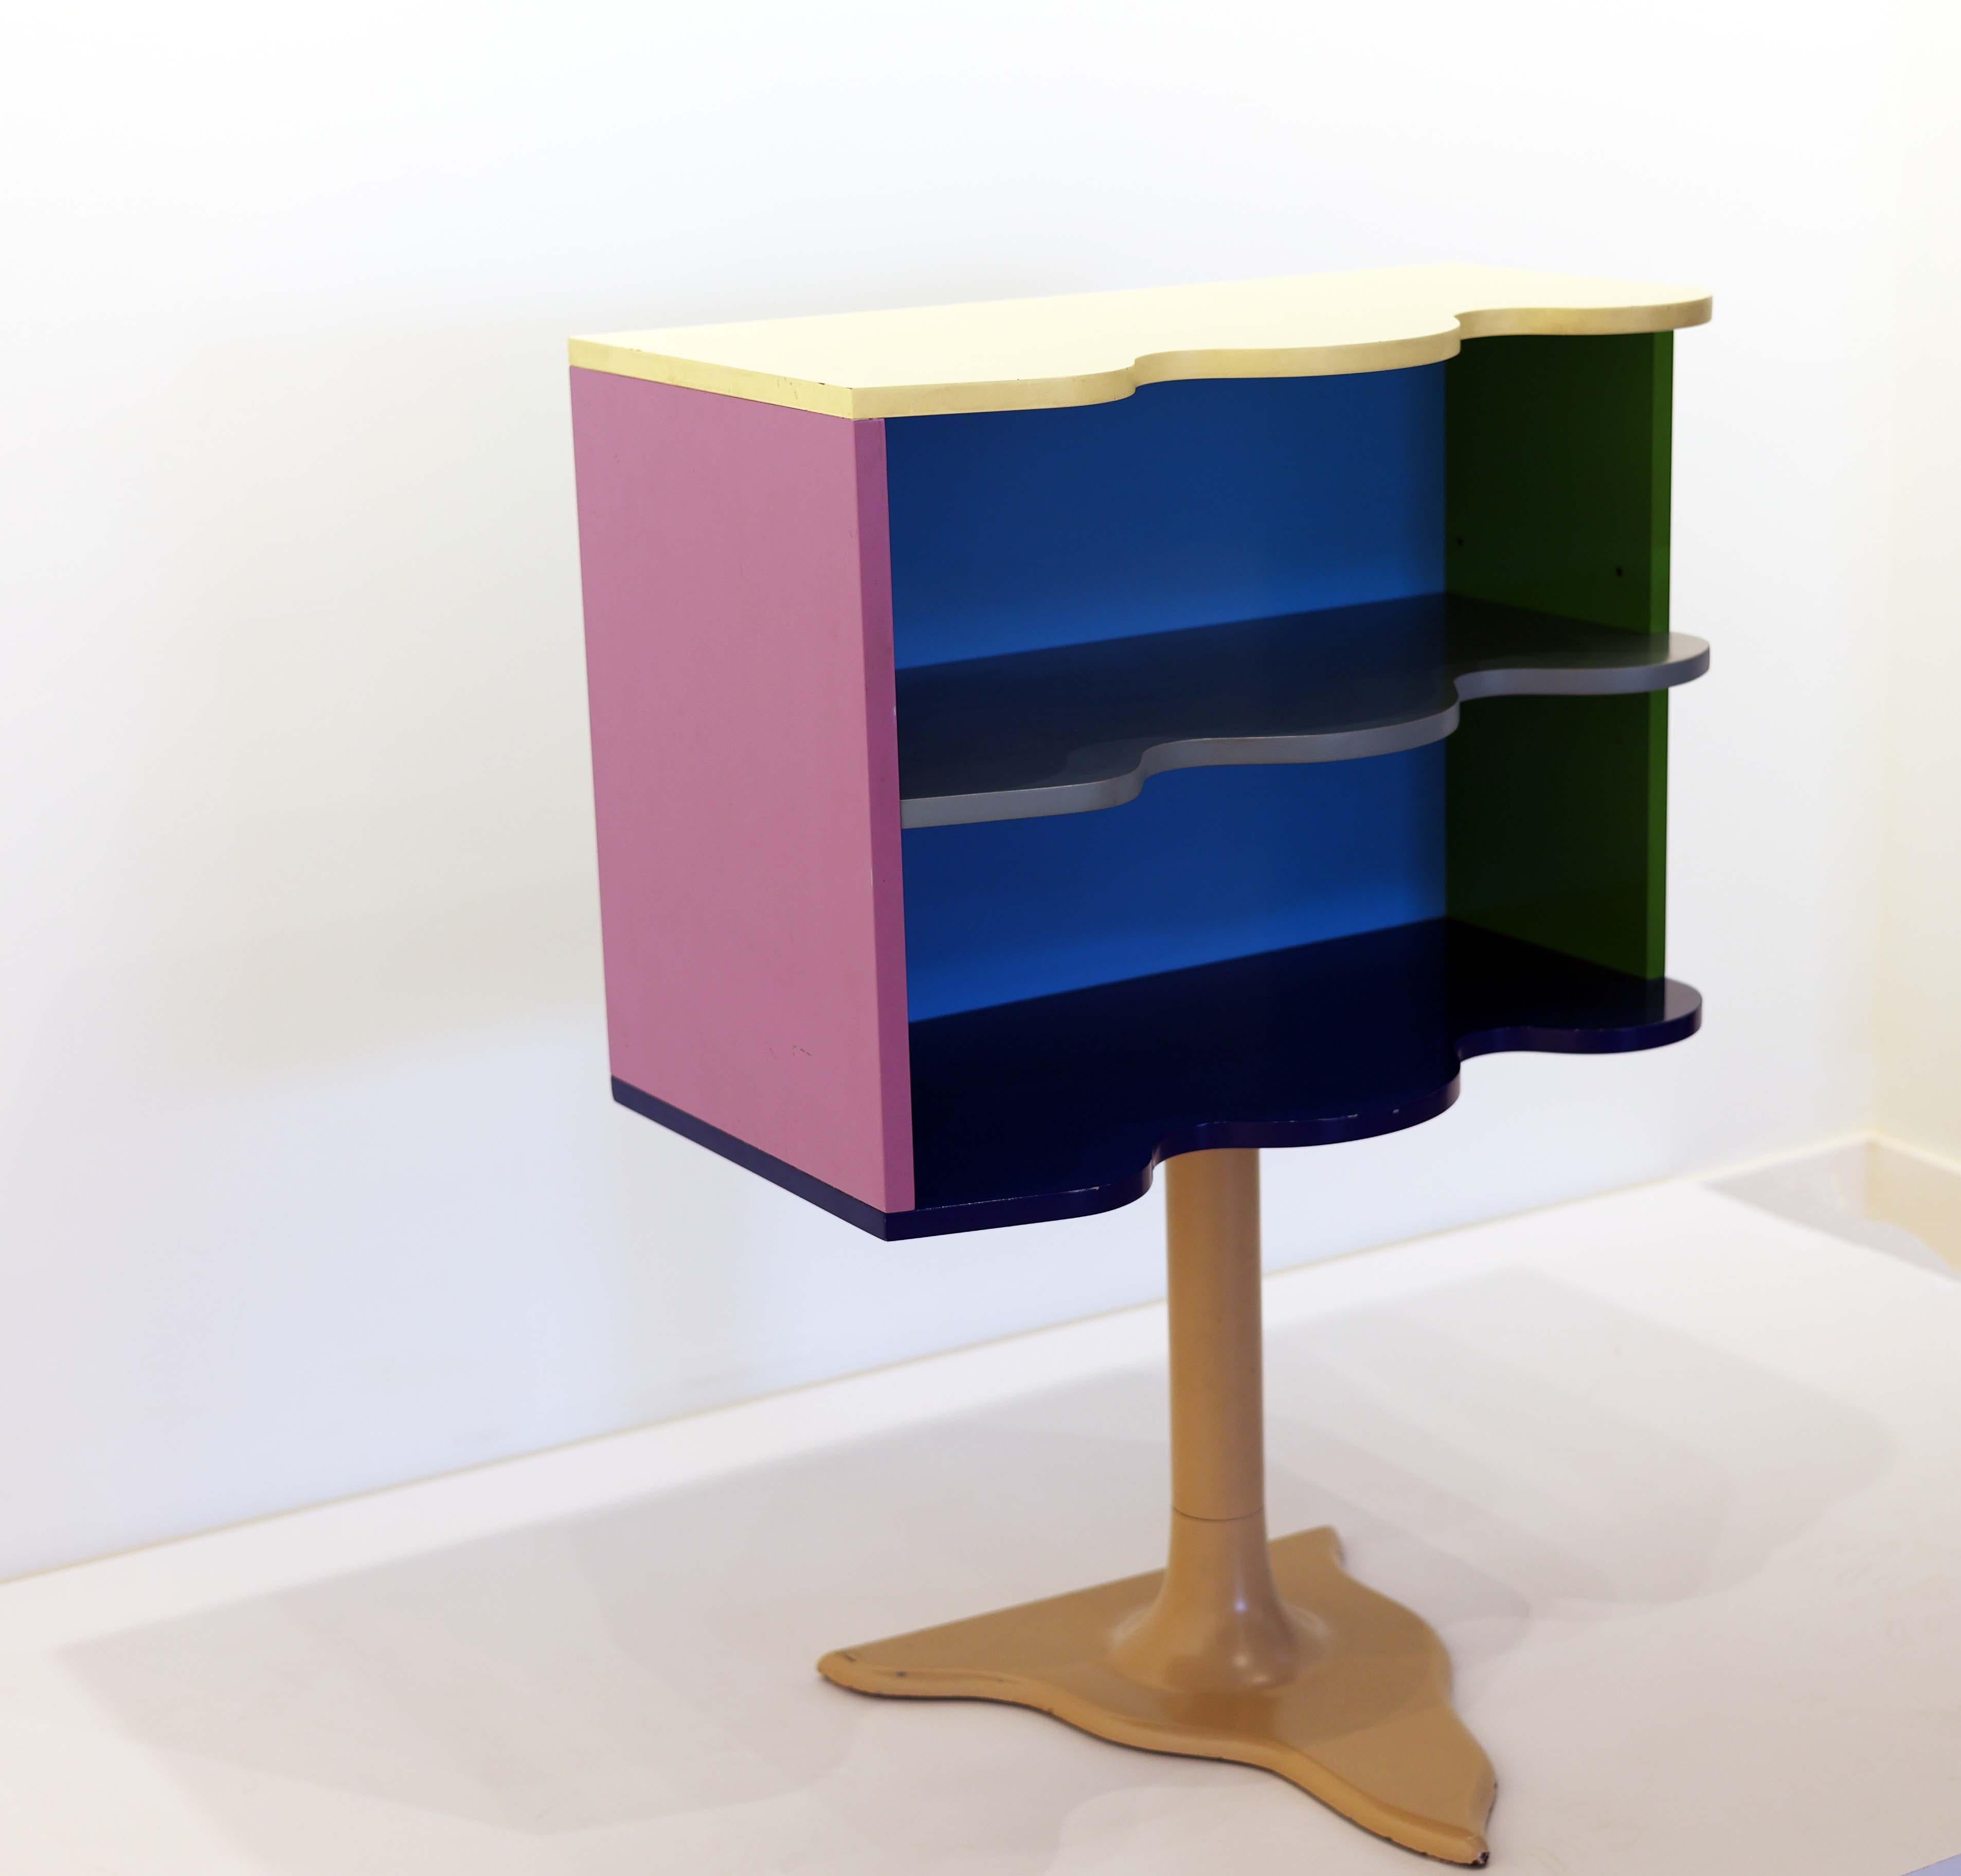 An extremely rare and important cabinet by Alessandro Mendini for Studio Alchimia. Model MDD 954, this well documented example represents the fun and functionality of early Alchimia work. A heavy and sturdy piece ready for decades of future use.